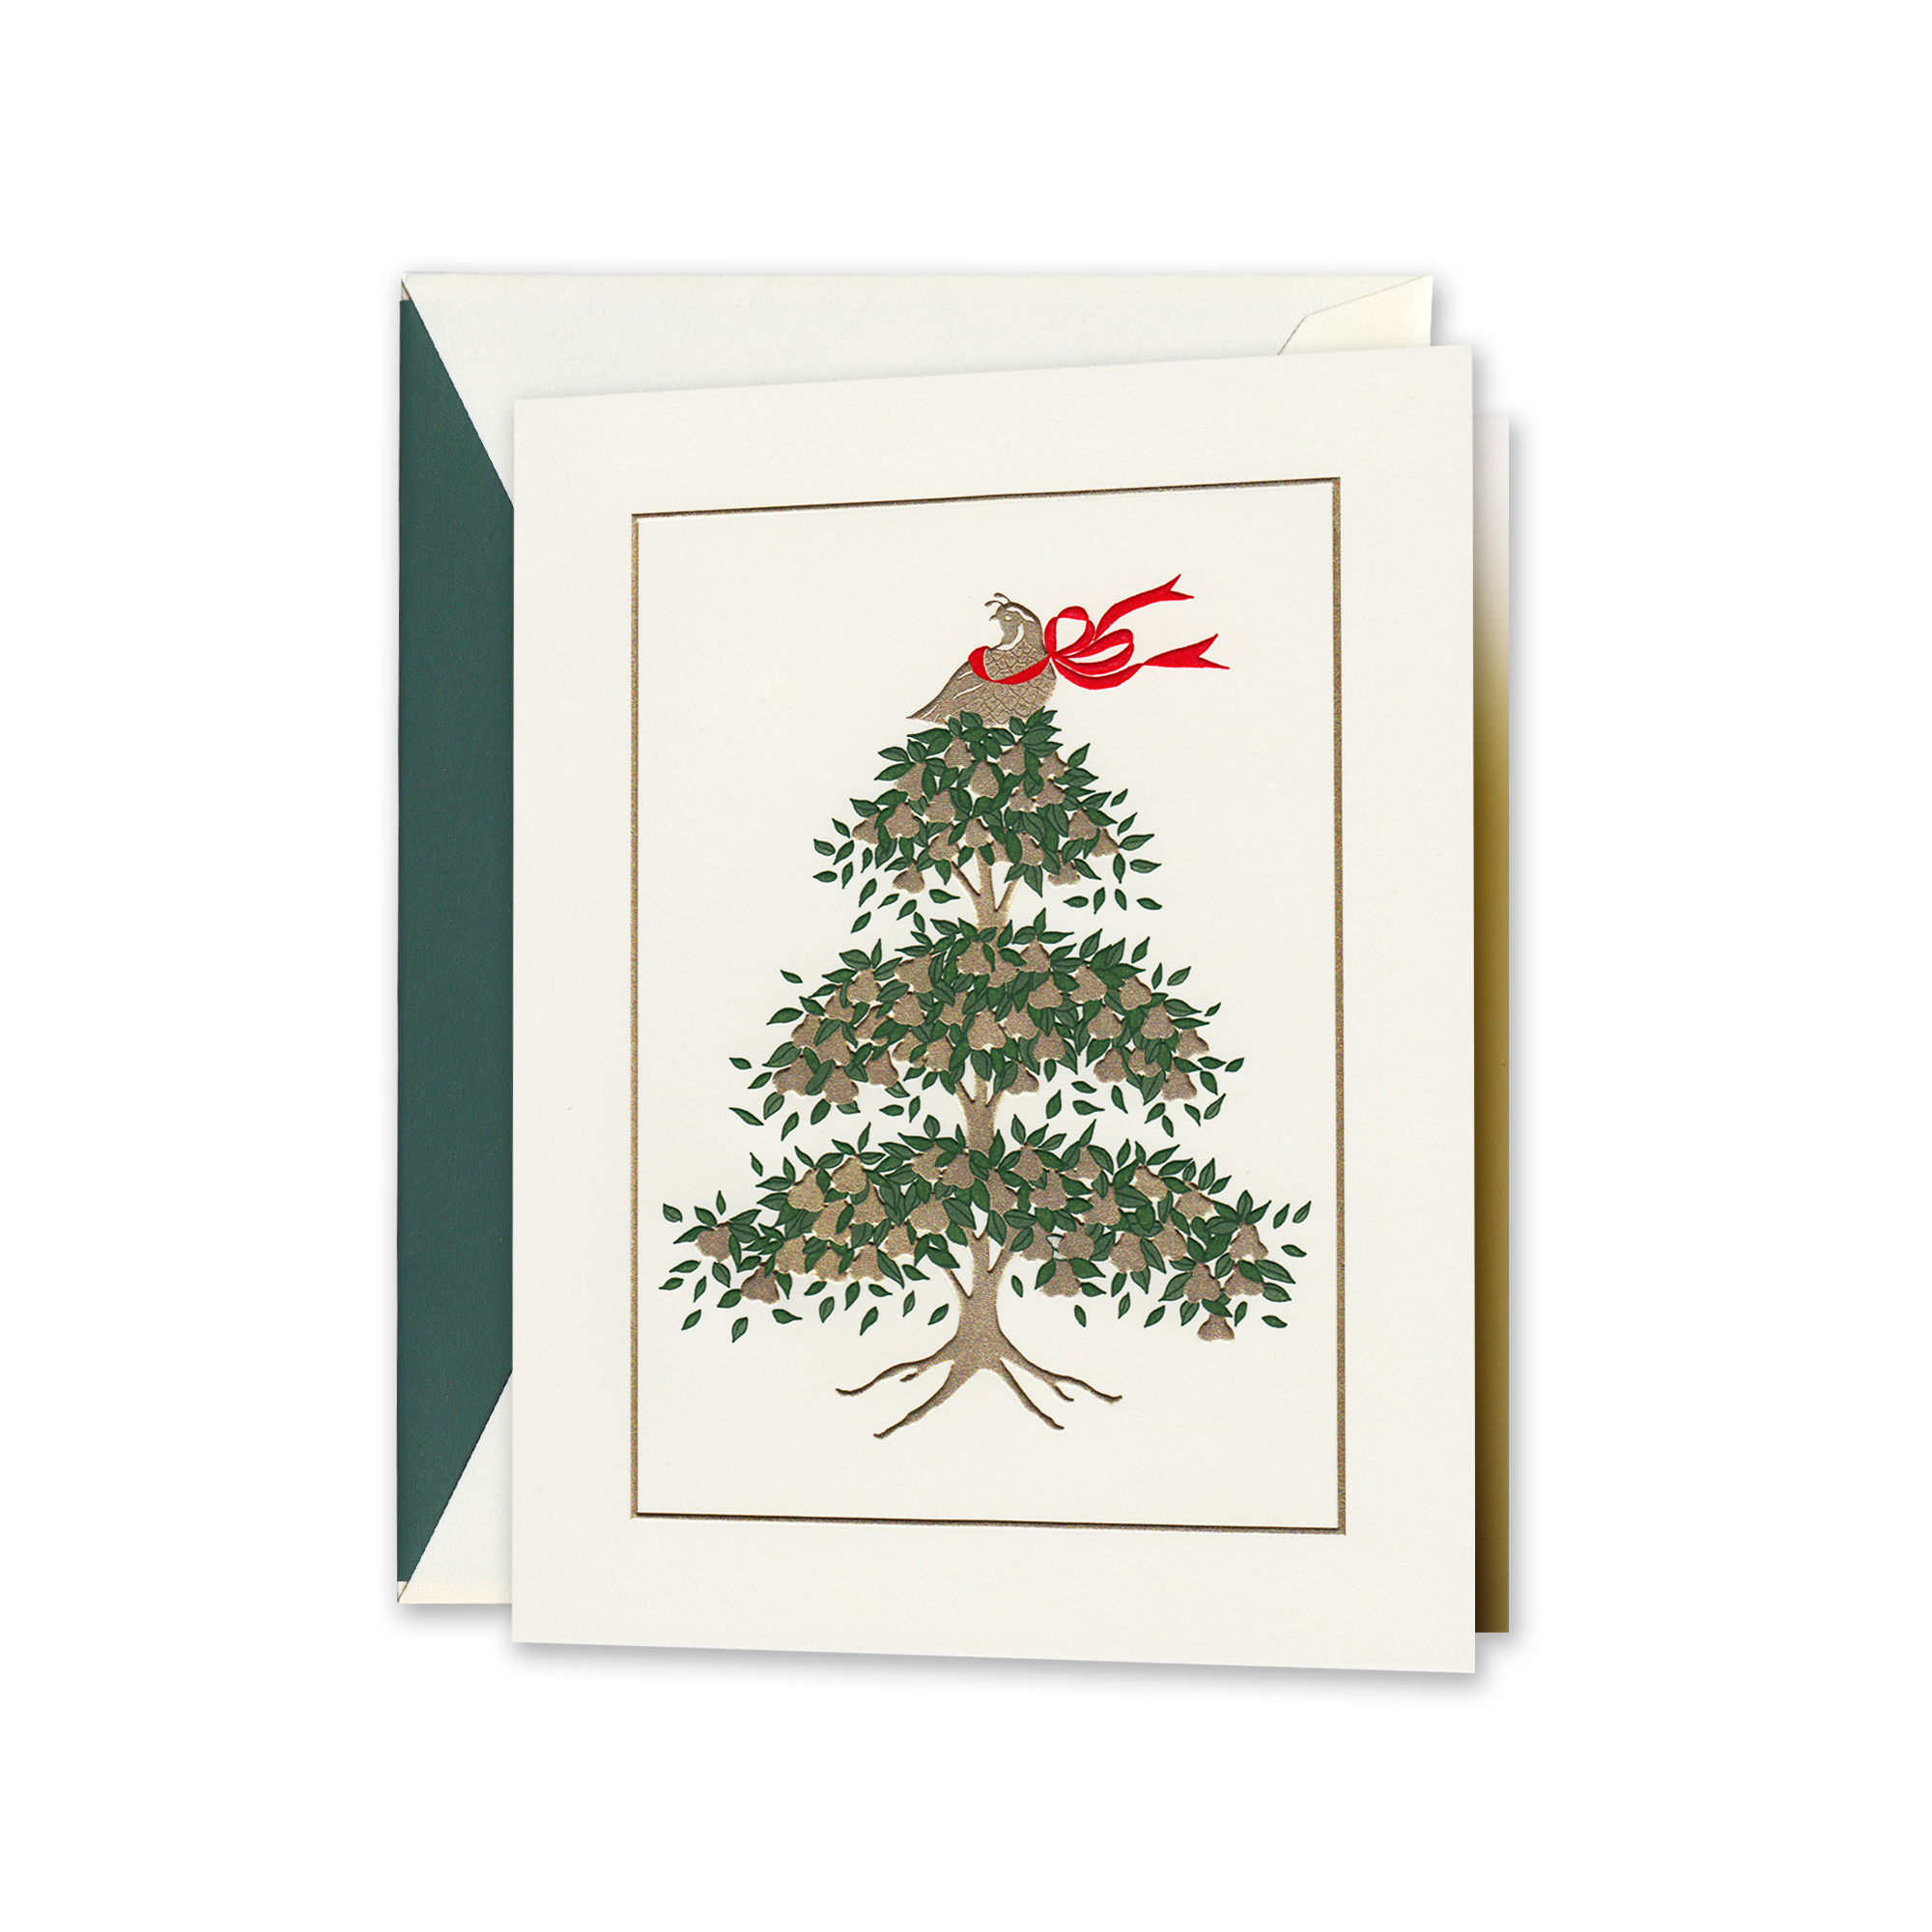 Crane & Co. Partridge In A Pear Tree Cards, Set of 10 | Gump's